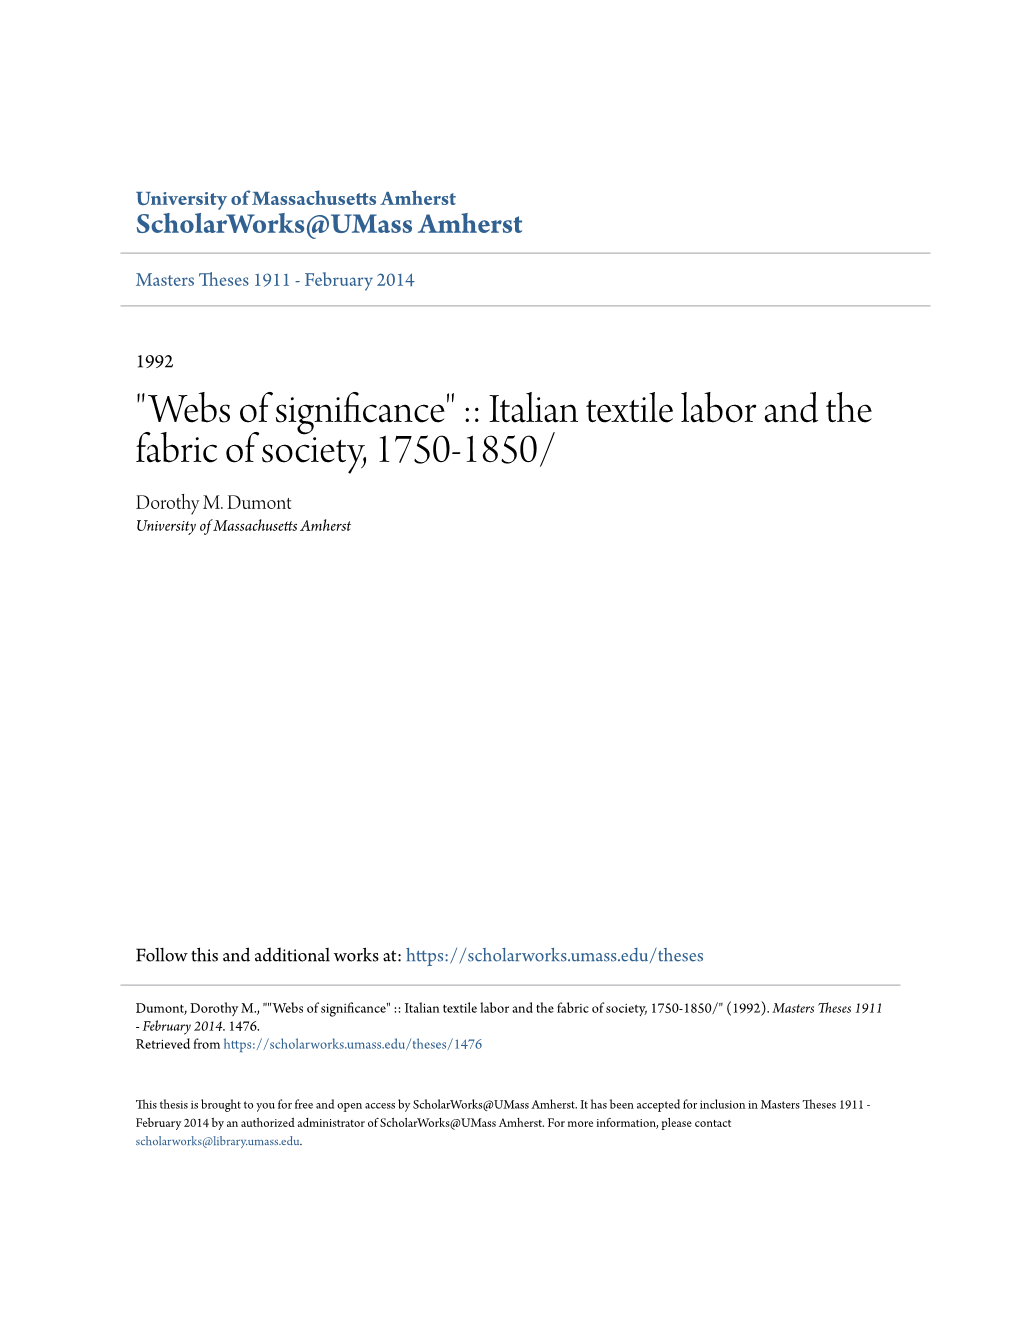 Italian Textile Labor and the Fabric of Society, 1750-1850/ Dorothy M